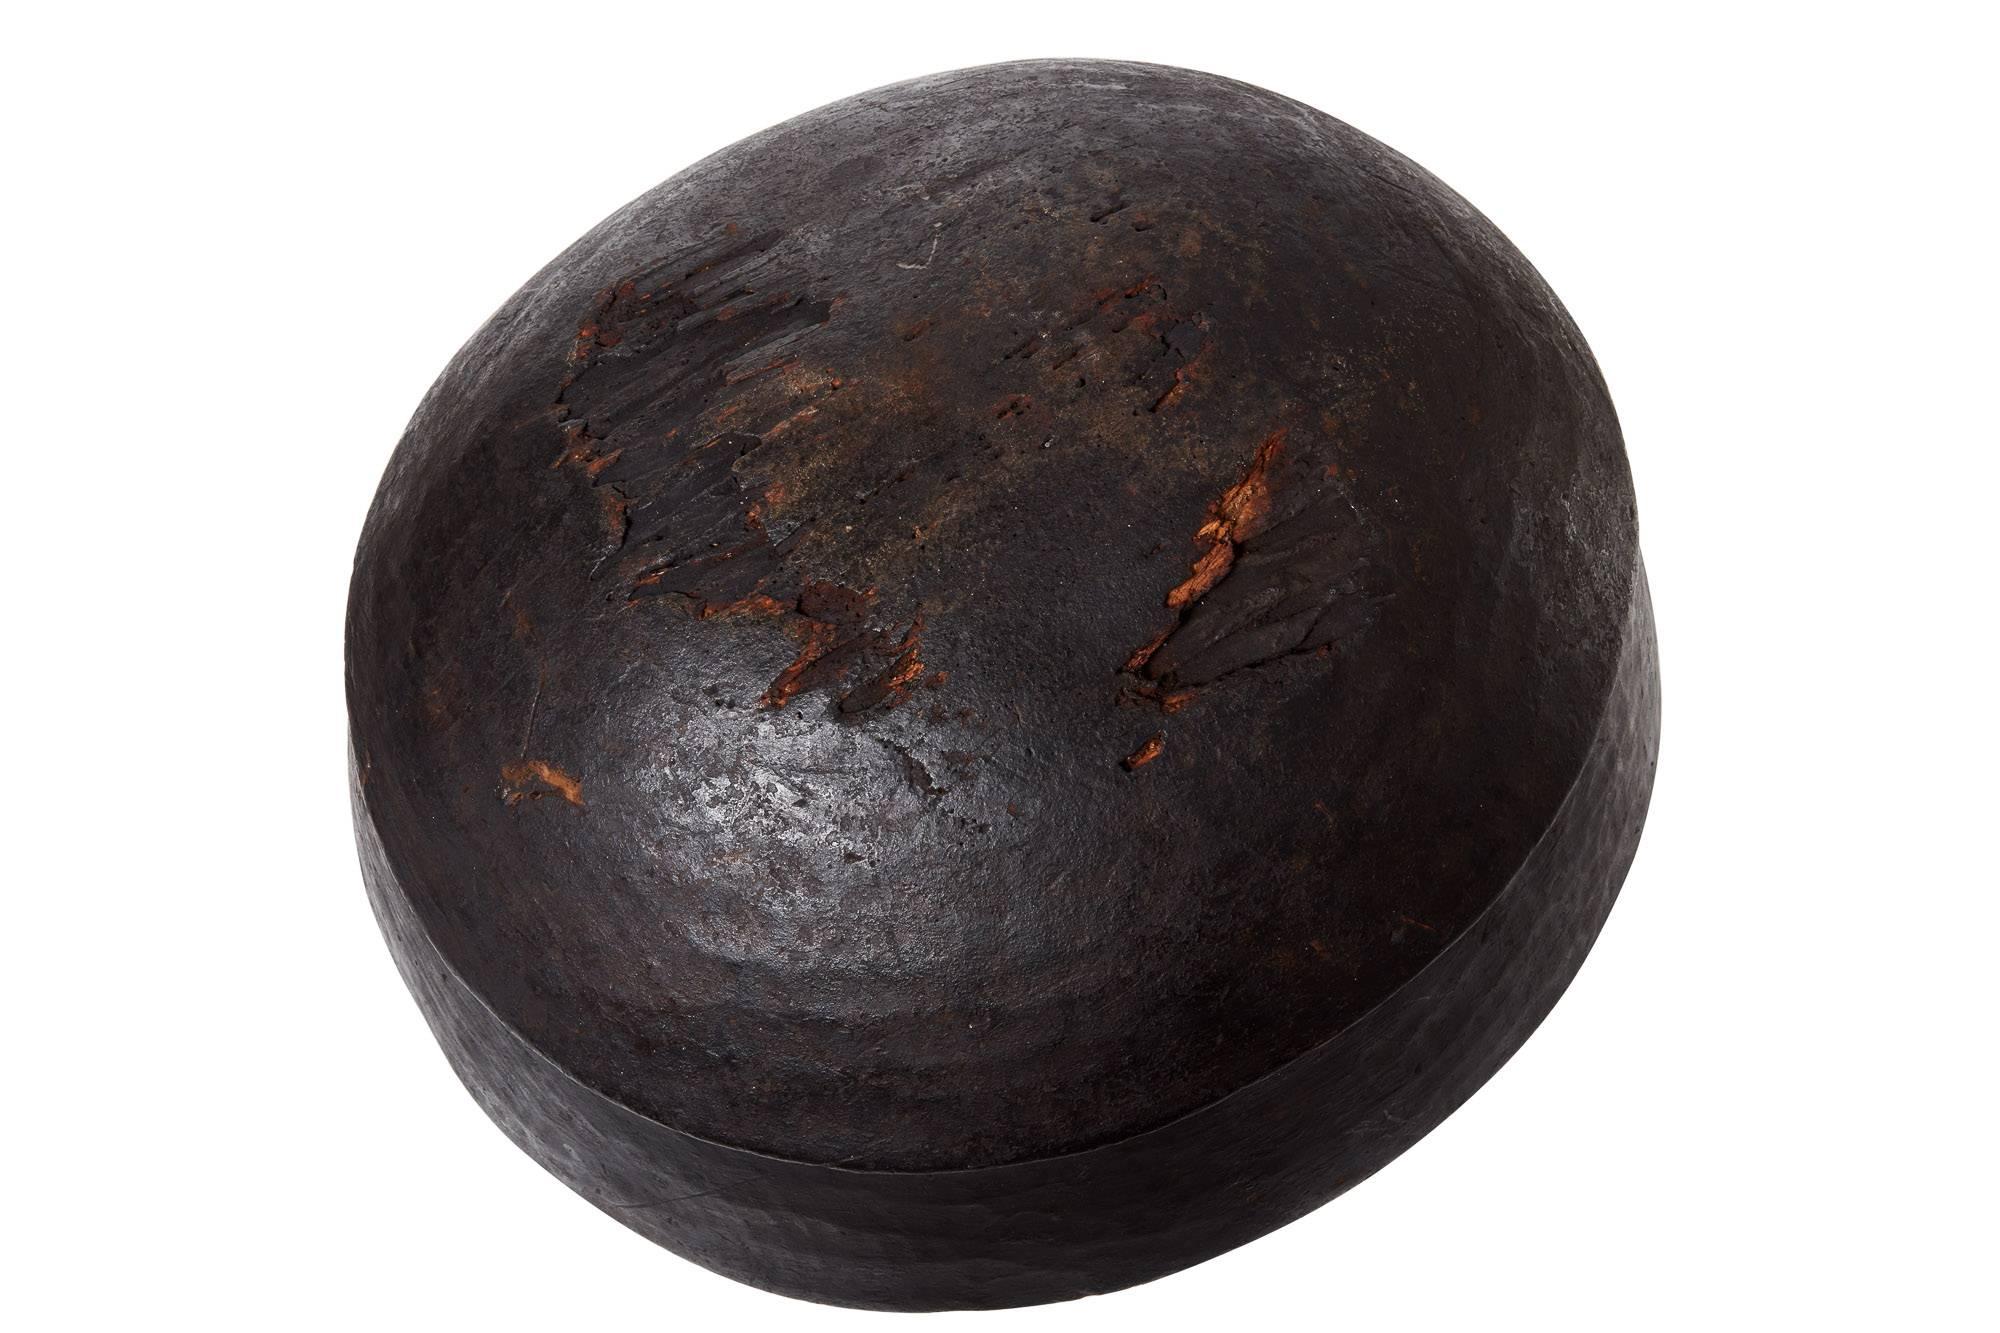 20th century black African bowl on 19th century Chinese Root "stand". Handcrafted wooden bowl with simple craved detail sitting on an unusual Chinese root stump. a great looking decorative object. Bowl 24" Diameter x 10" H. Stand